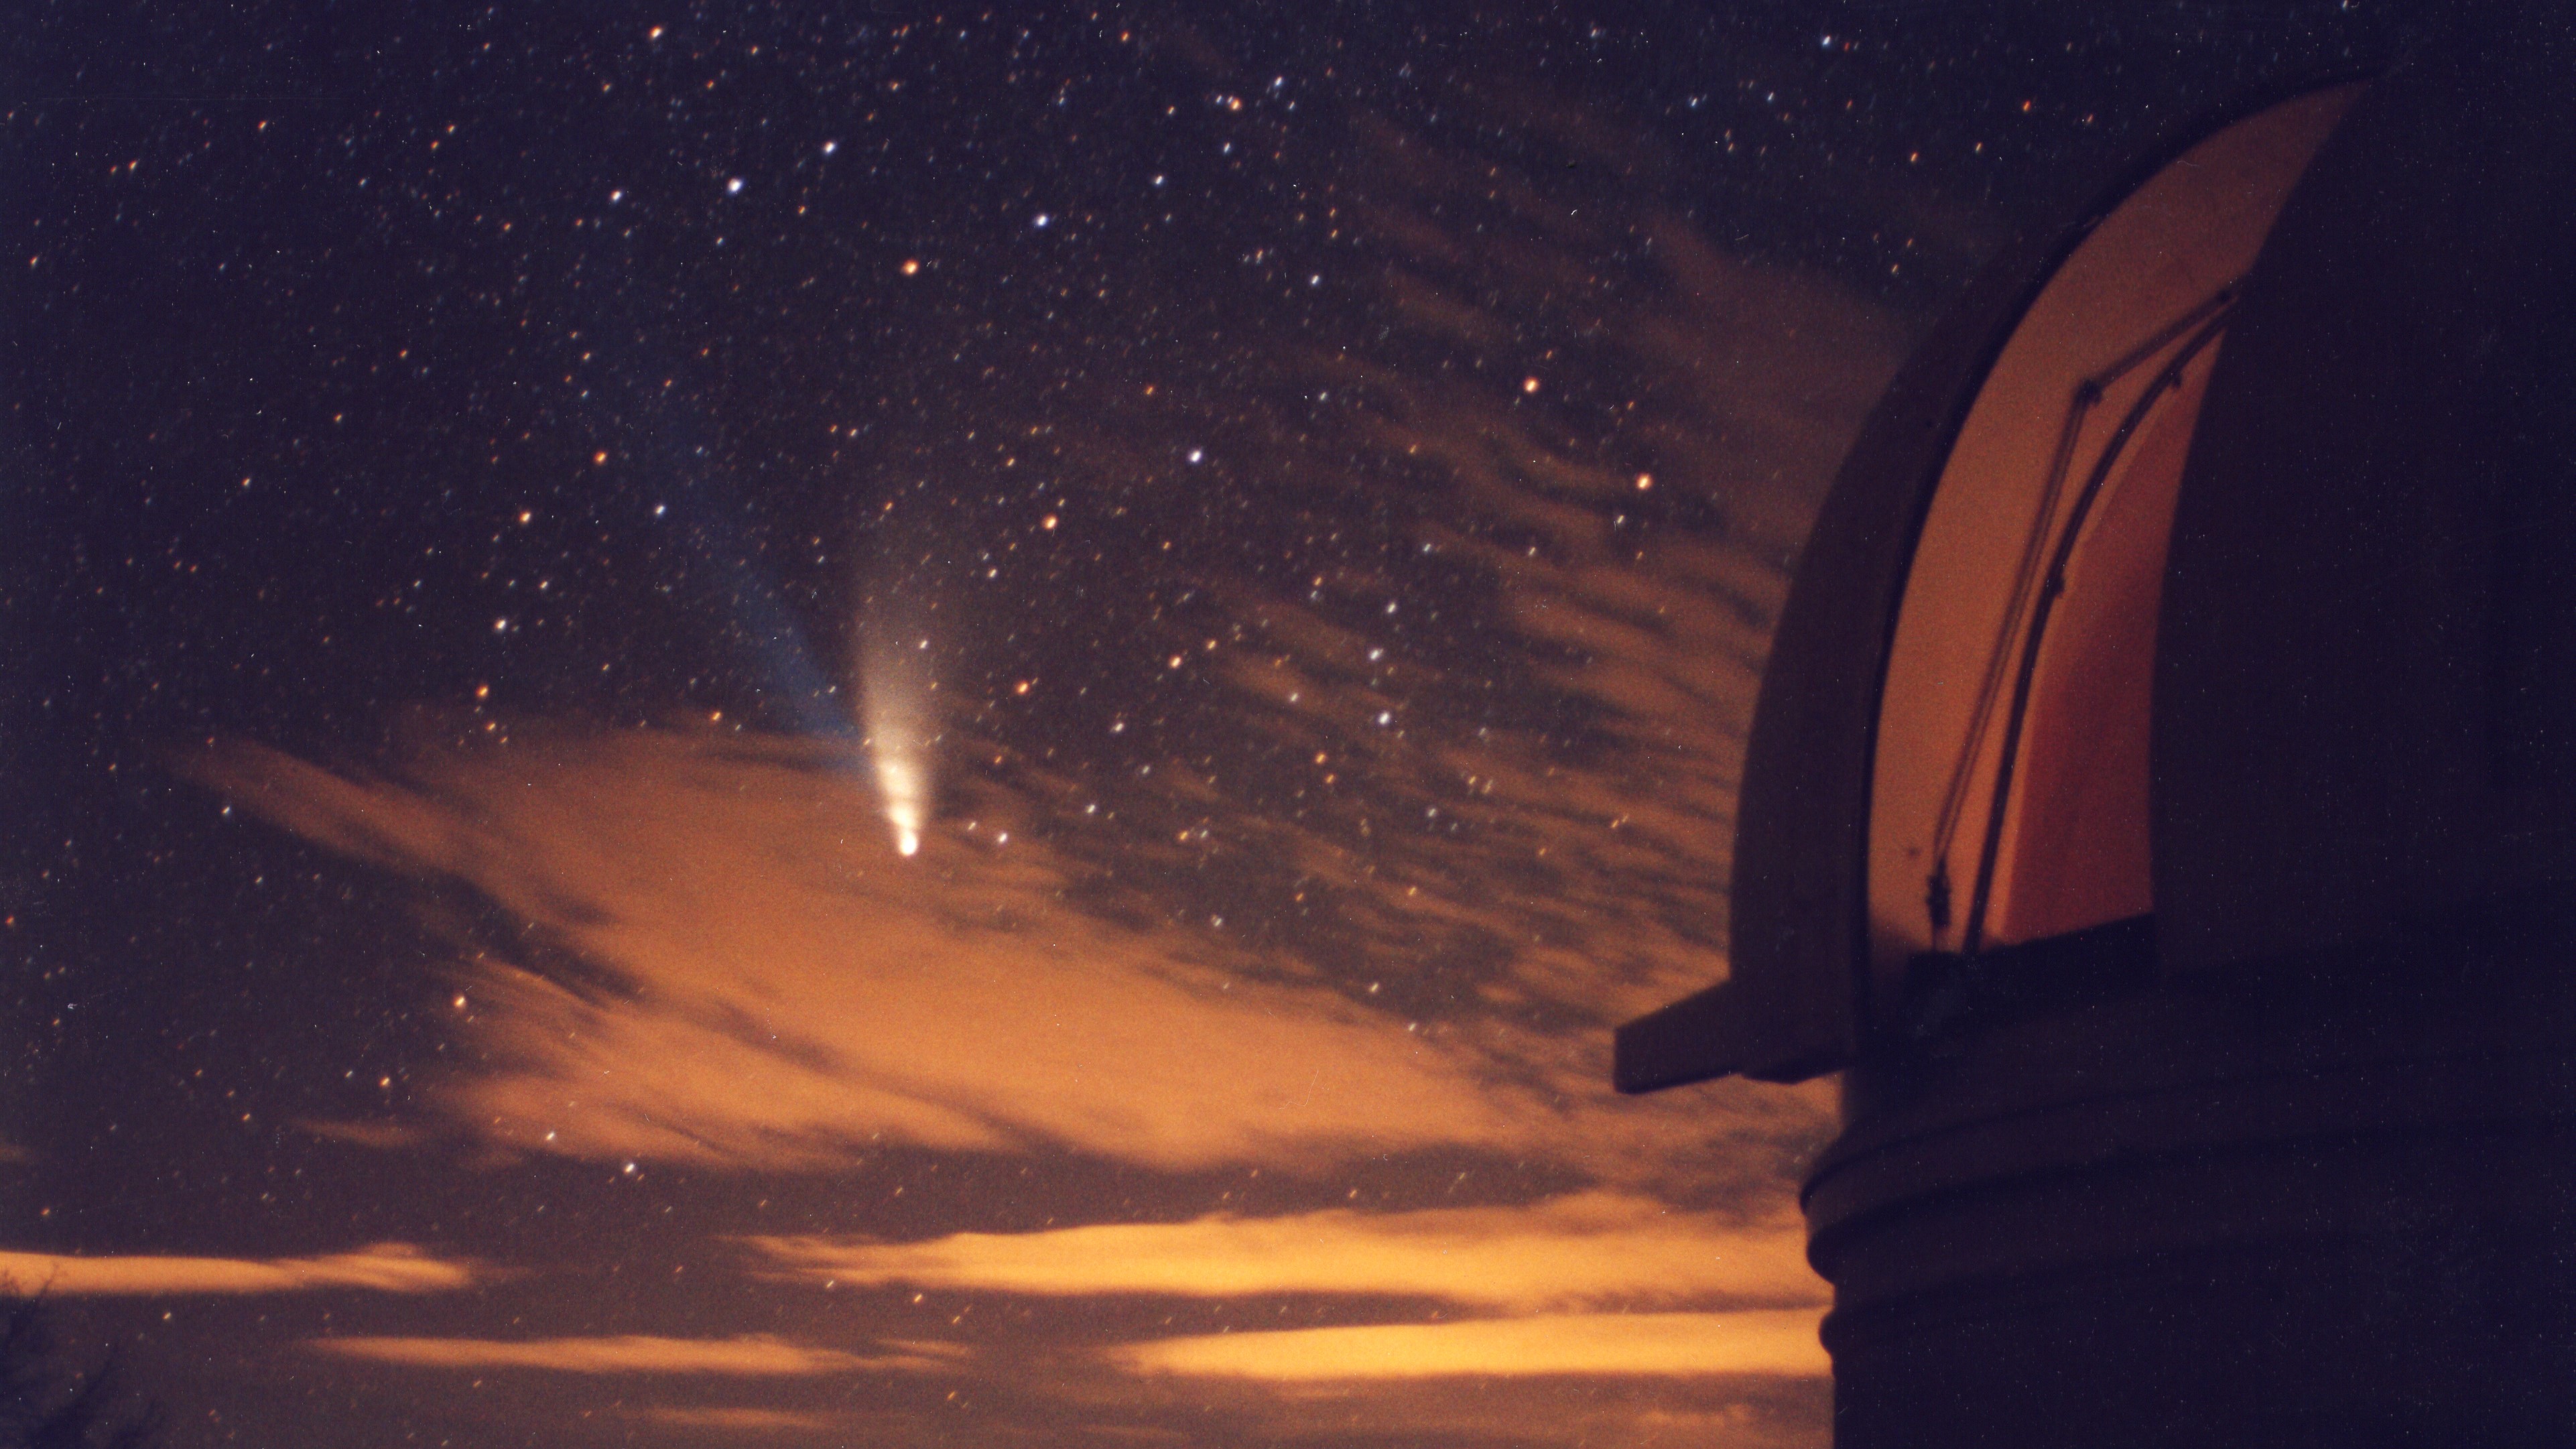 Hale-Bopp comet won't return to the inner solar system for thousands of years.